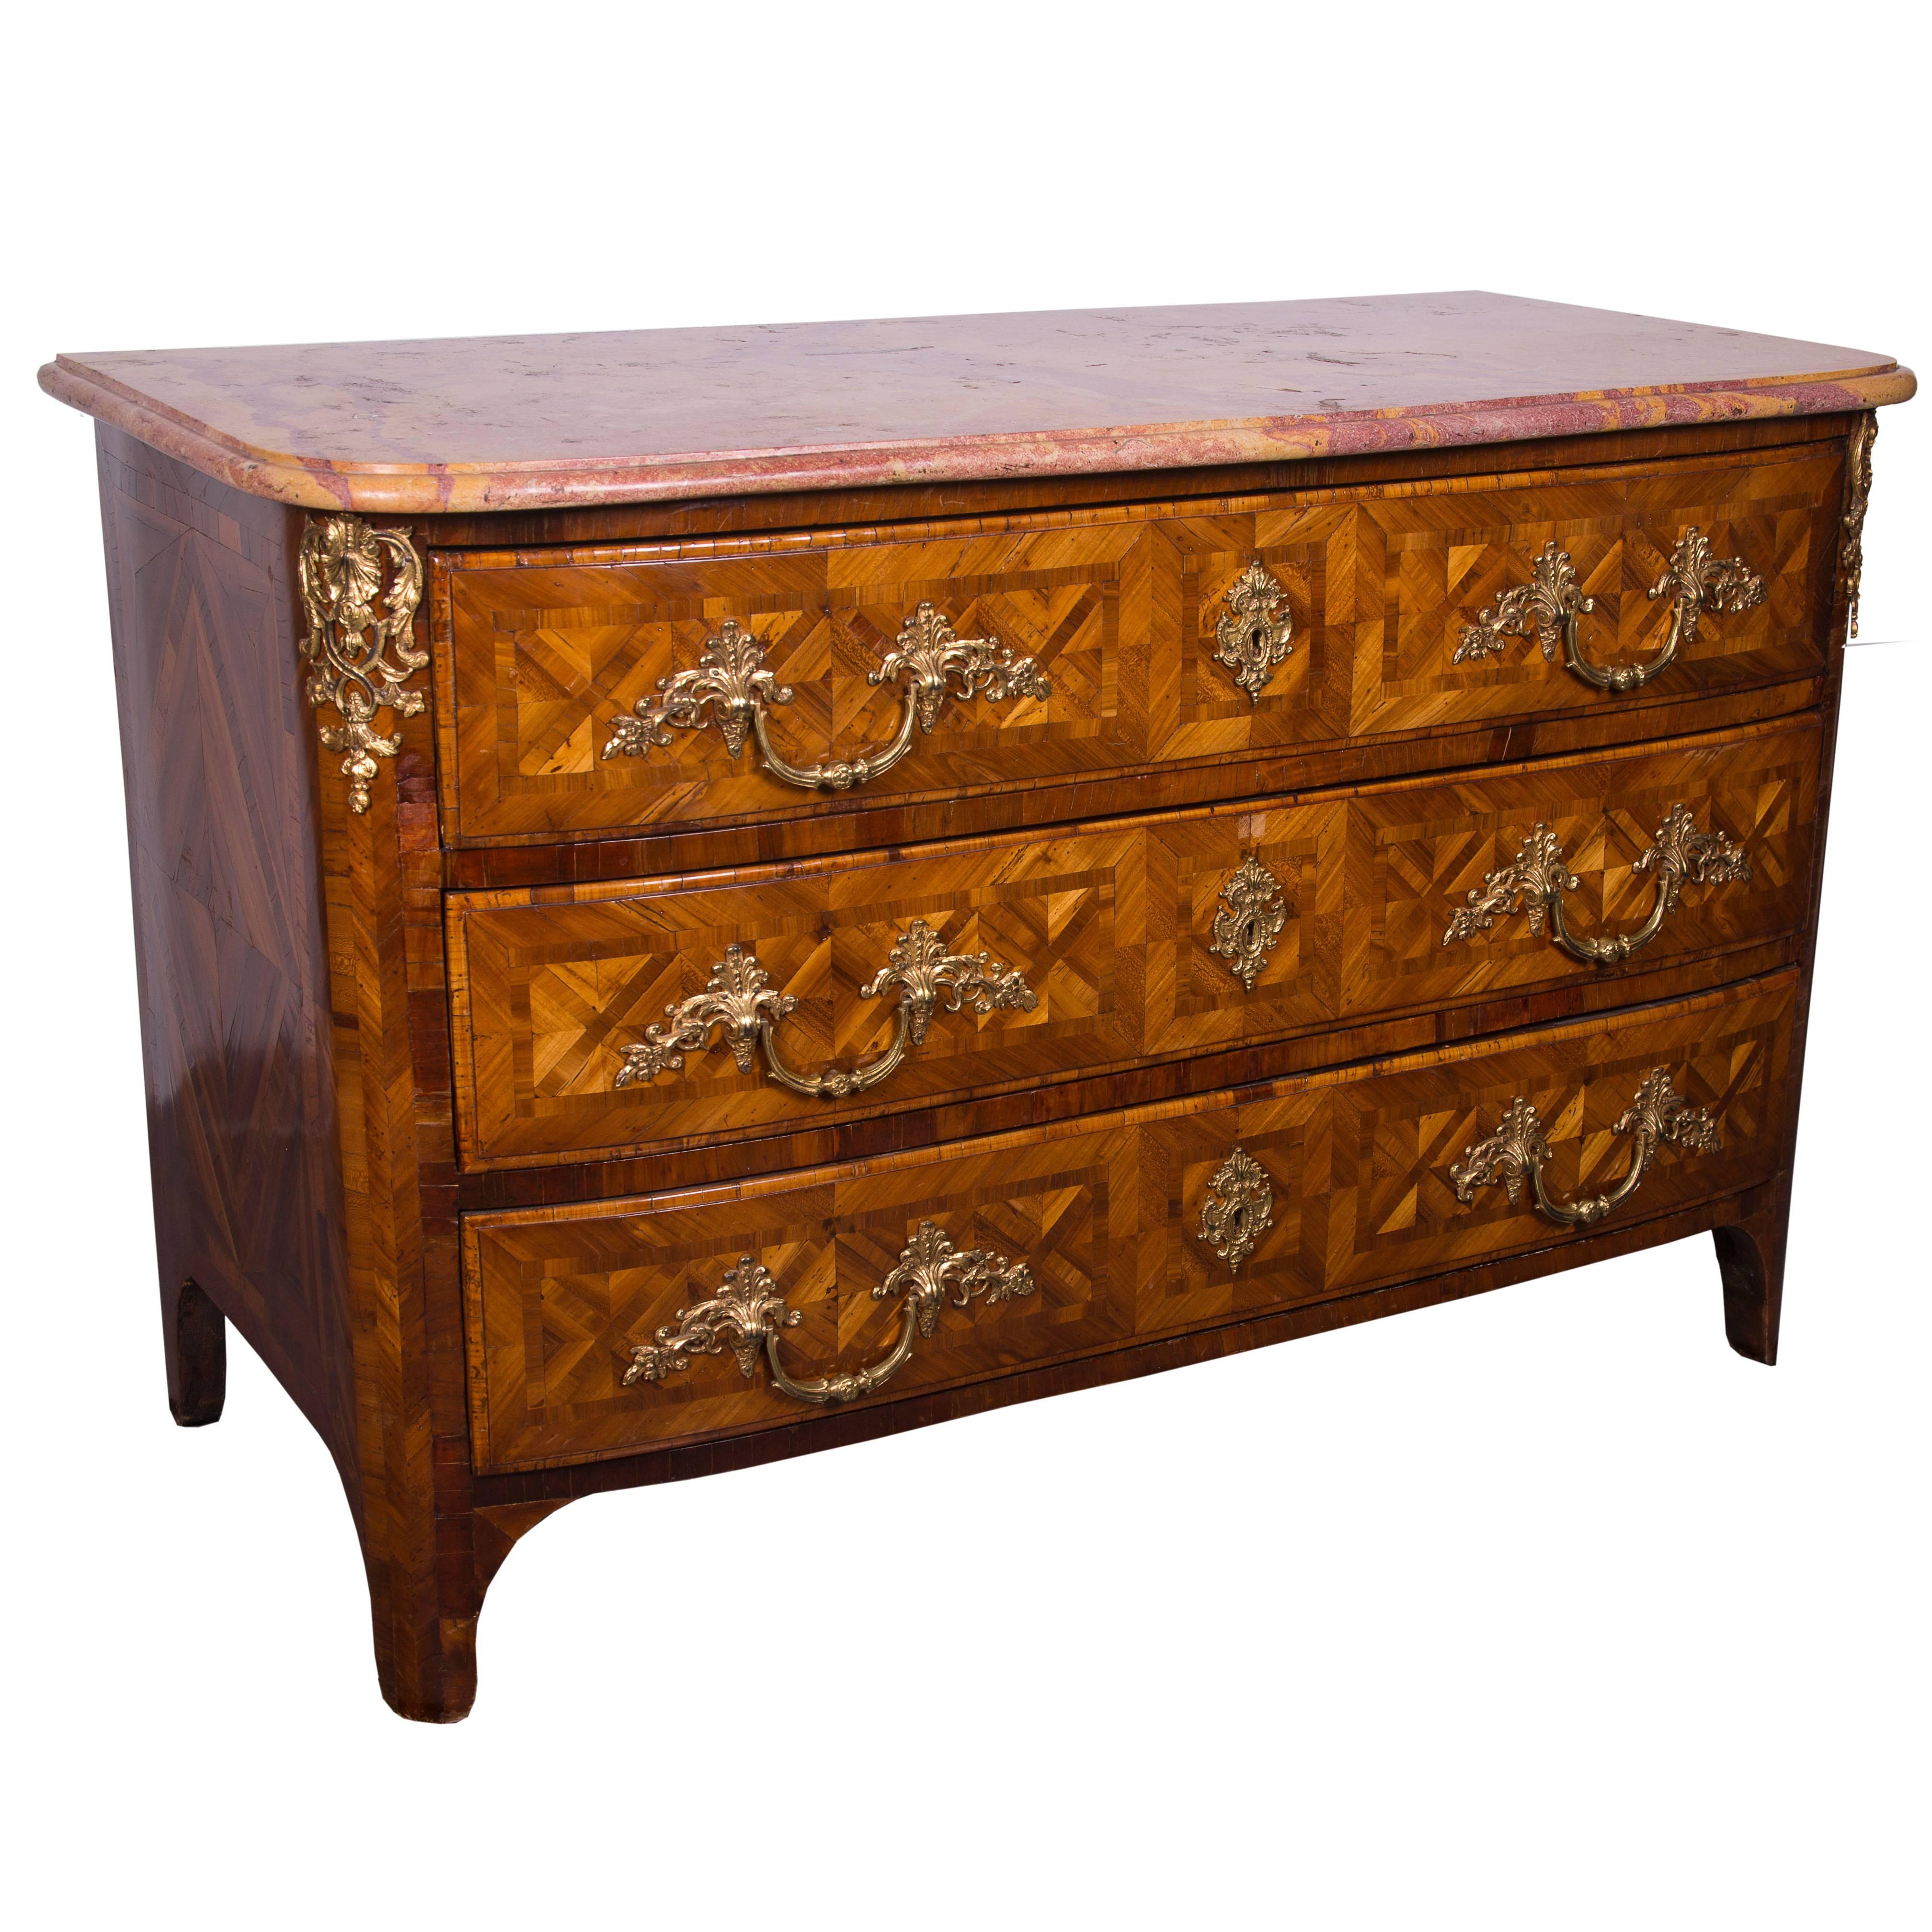 French Regence Inlaid Commode